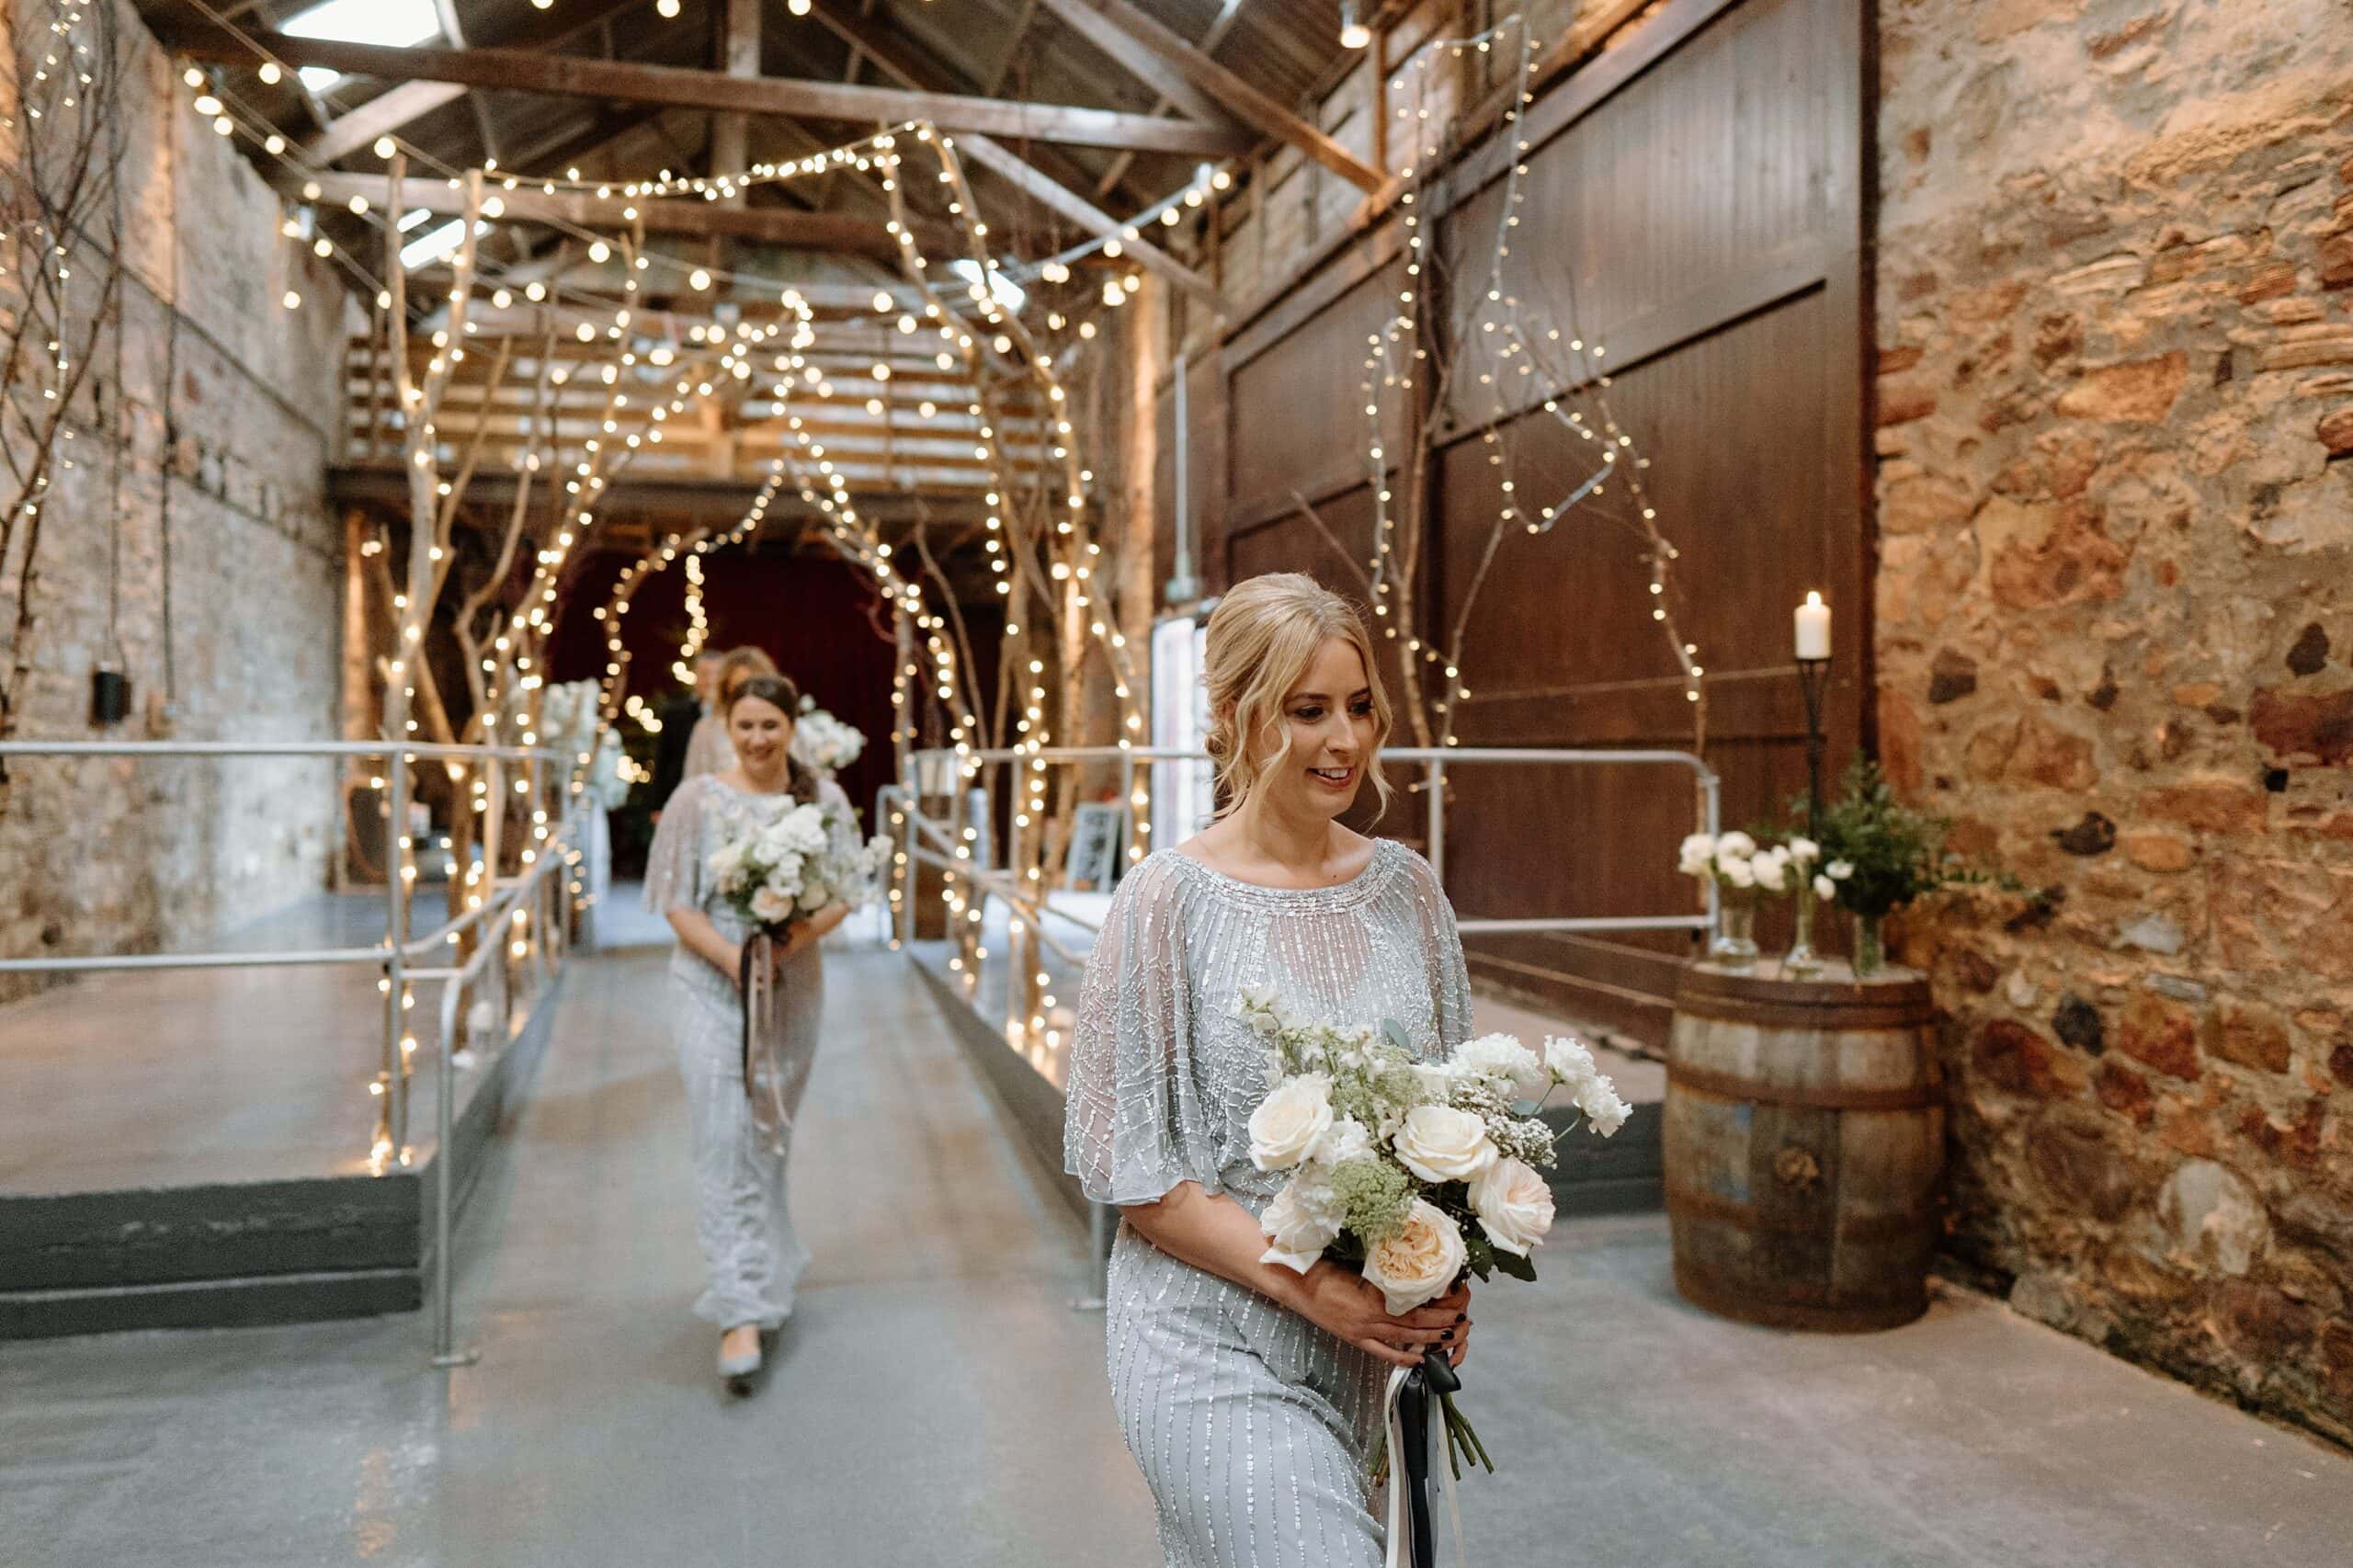 kinkell byre wedding photos bridesmaids in silver sparkly dresses walking down hall to wedding ceremony